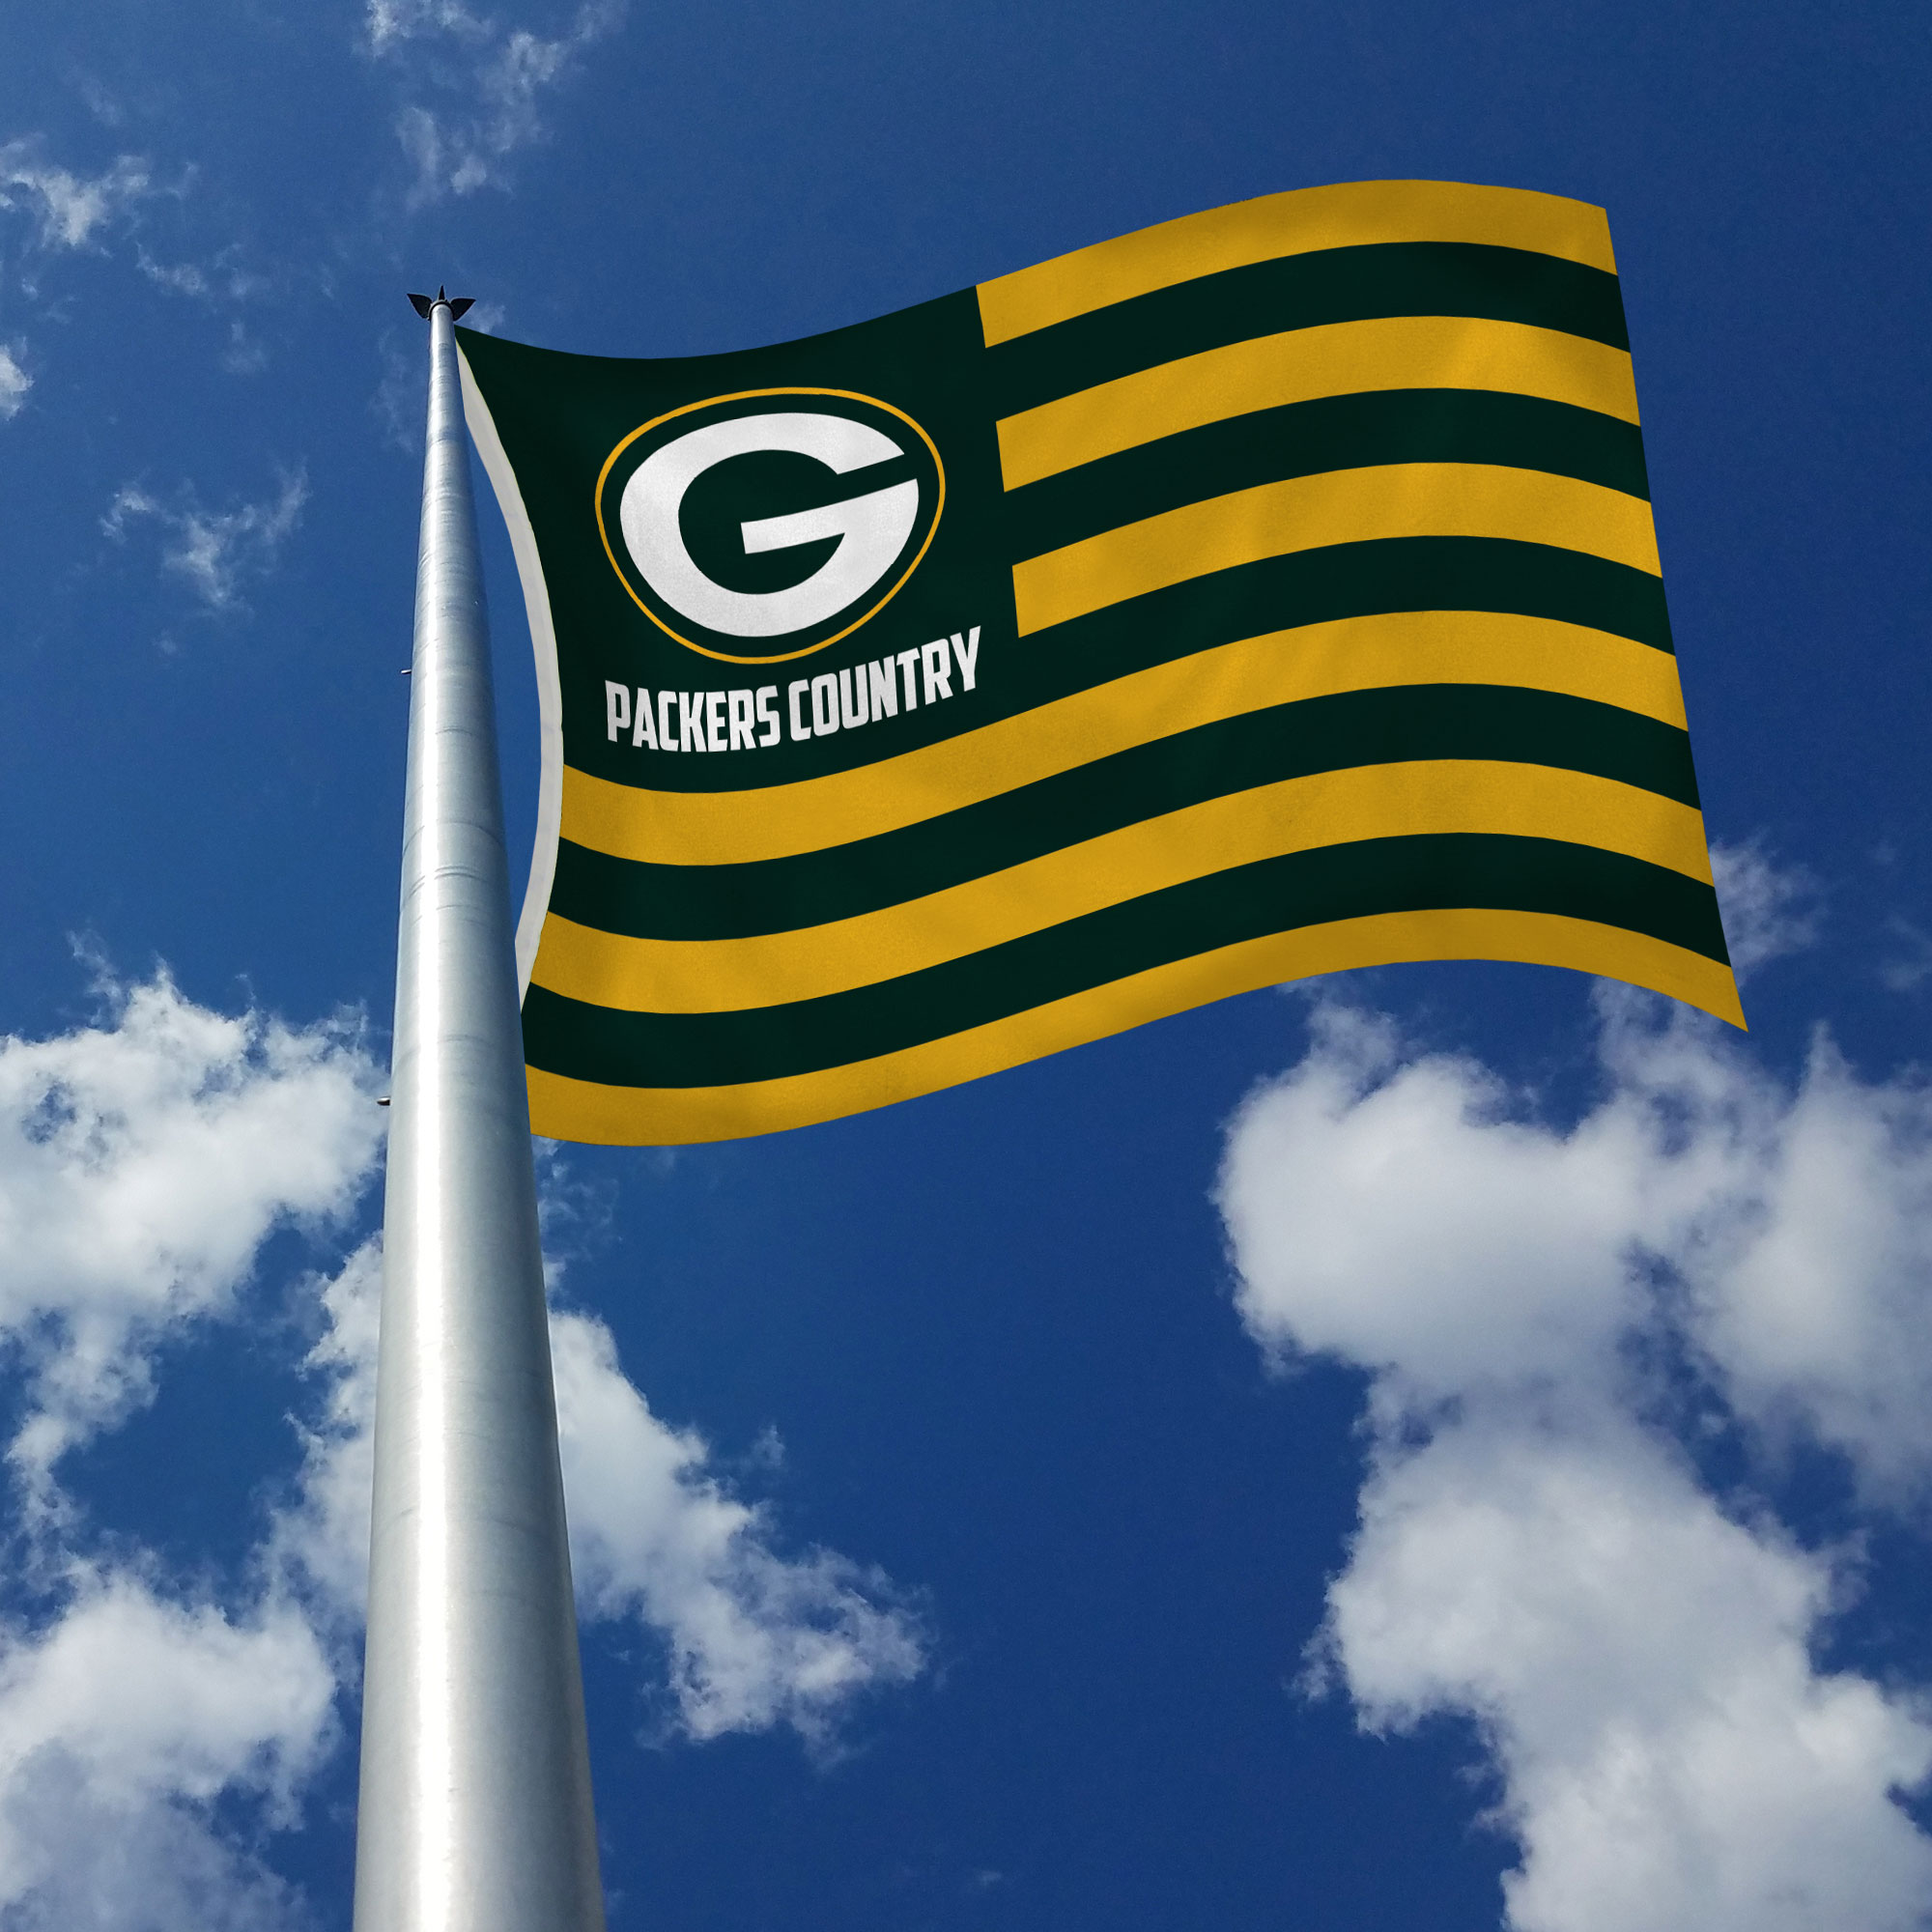 Rico Industries NFL Football Green Bay Packers Country 3' x 5' Banner Flag